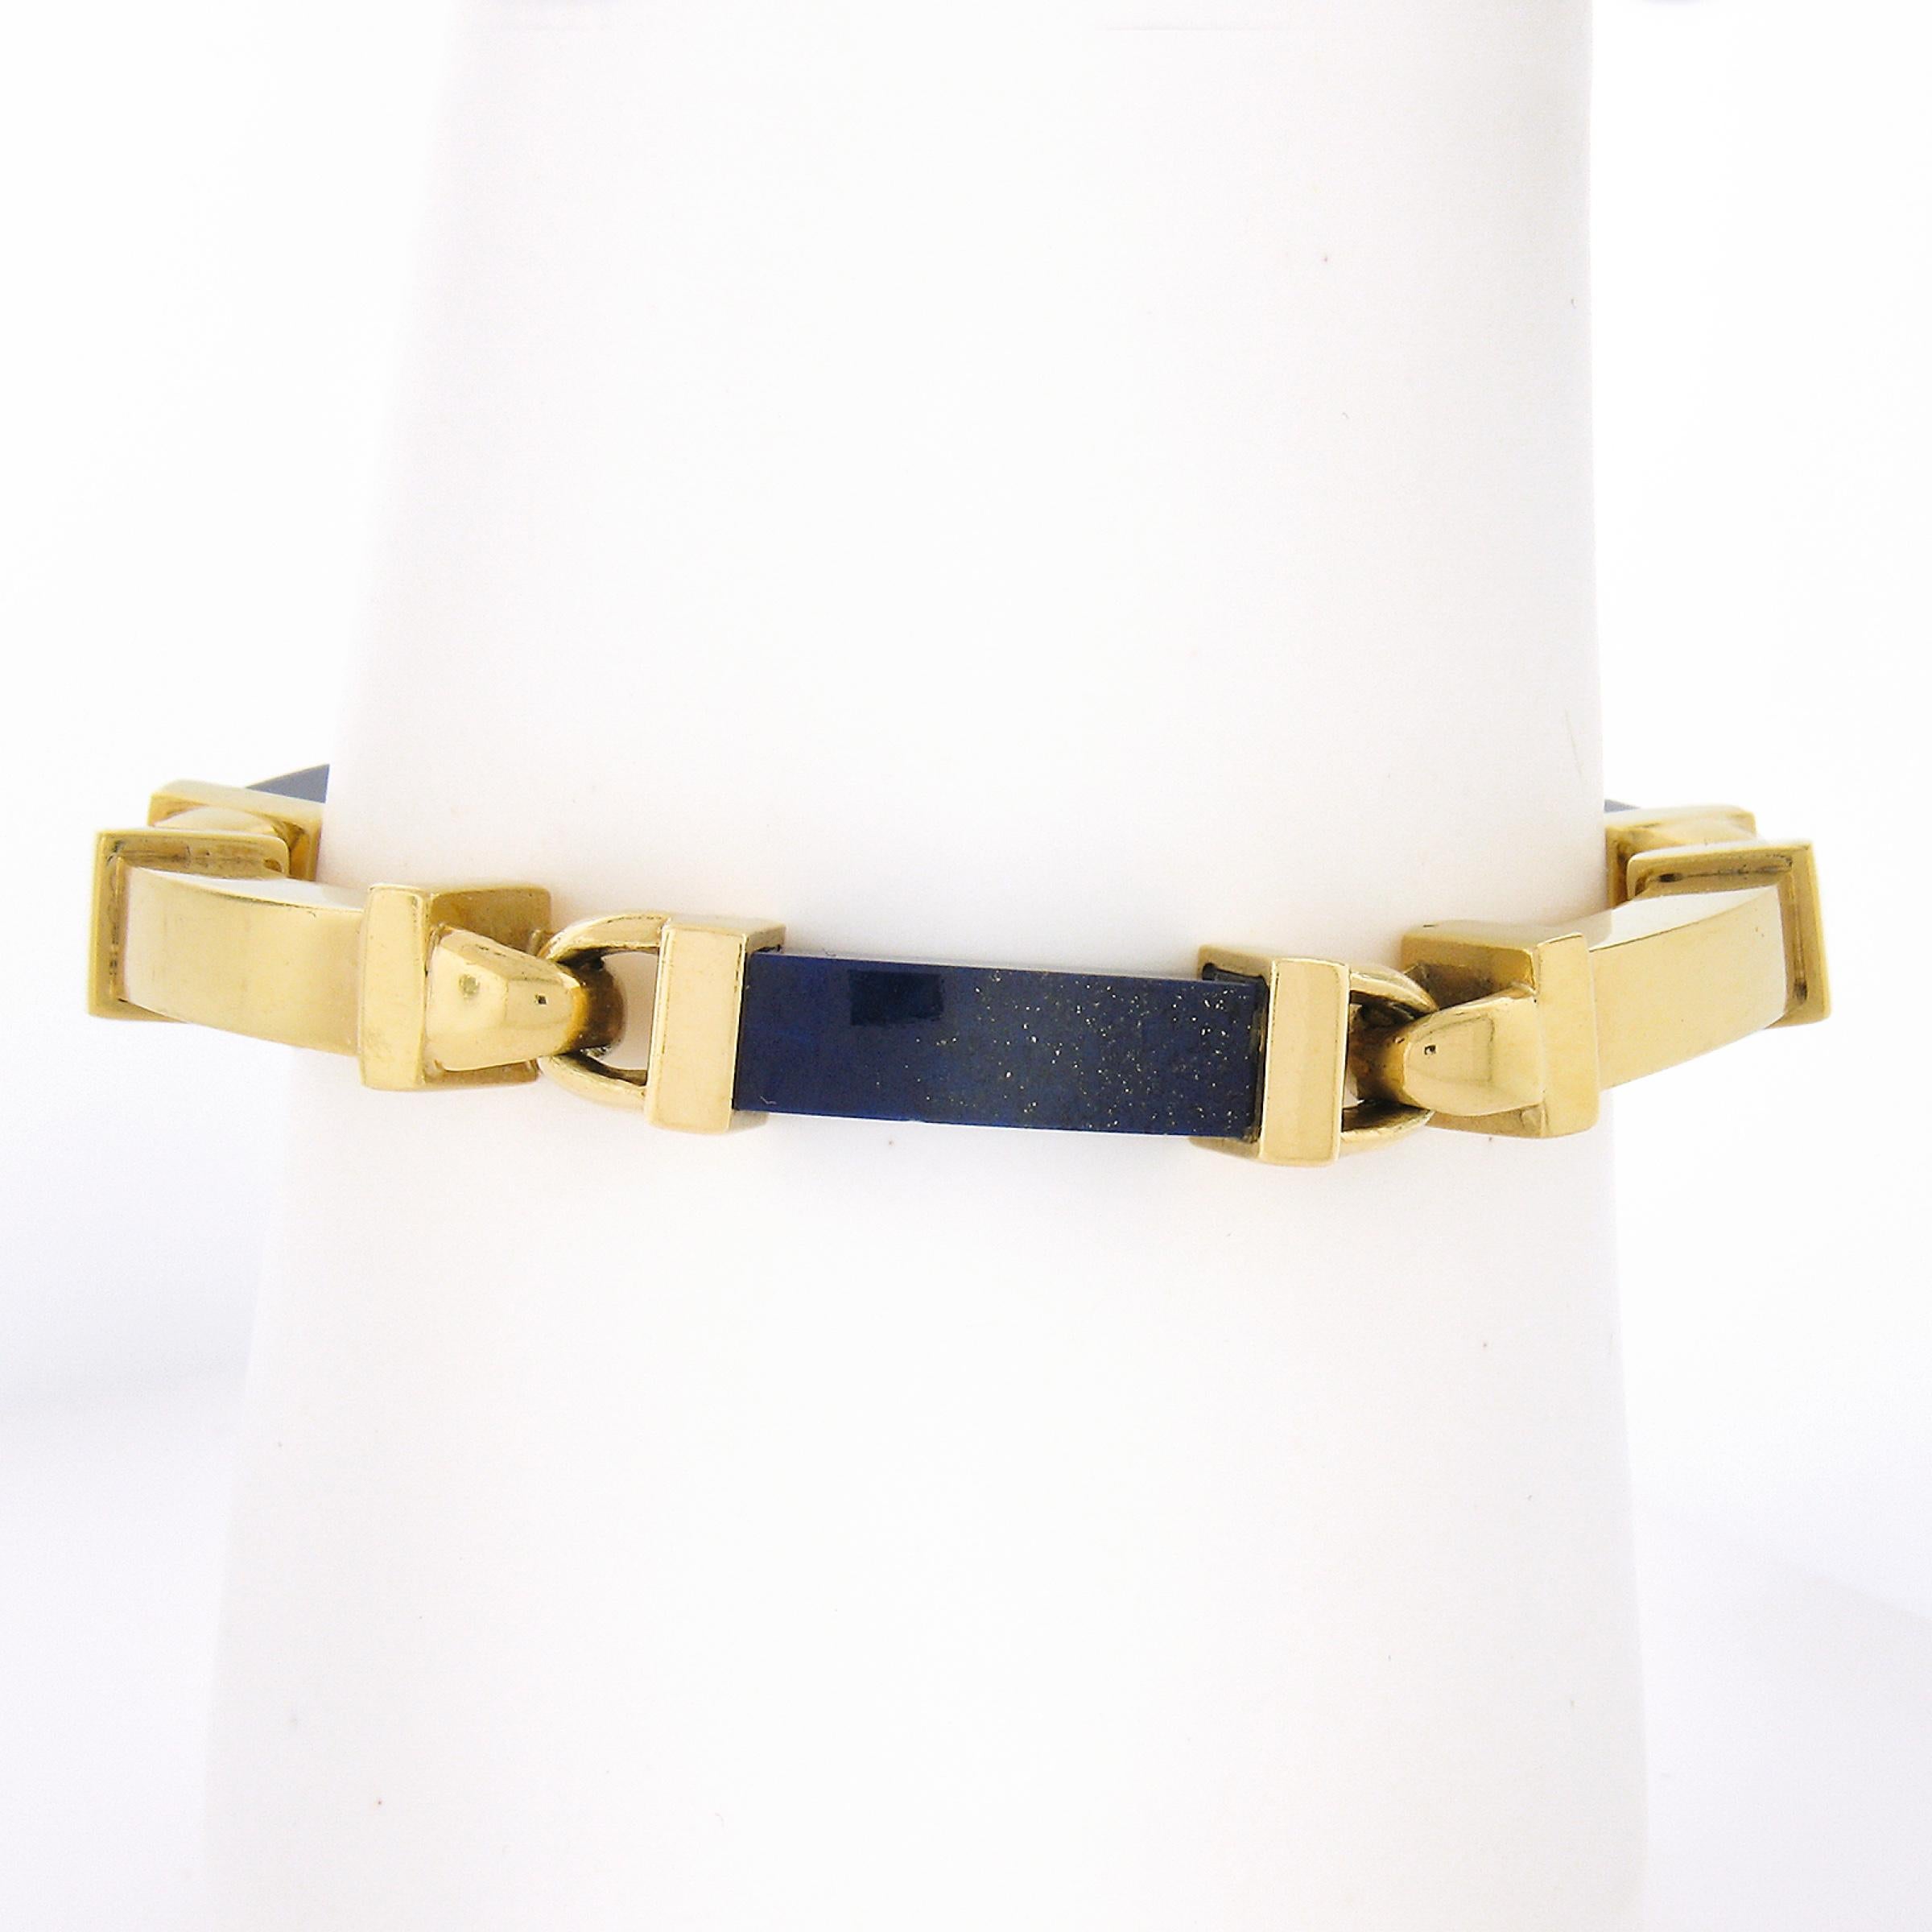 --Stone(s):--
(3) Natural Genuine Lapis Lazuli - Curved Rectangular Shape - Cap Set - Blue Color

Material: Solid 18k Yellow Gold
Weight: 50.47 Grams
Chain Type: Alternating Lapis & Gold Links
Chain Length: Comfortably fits up to 7